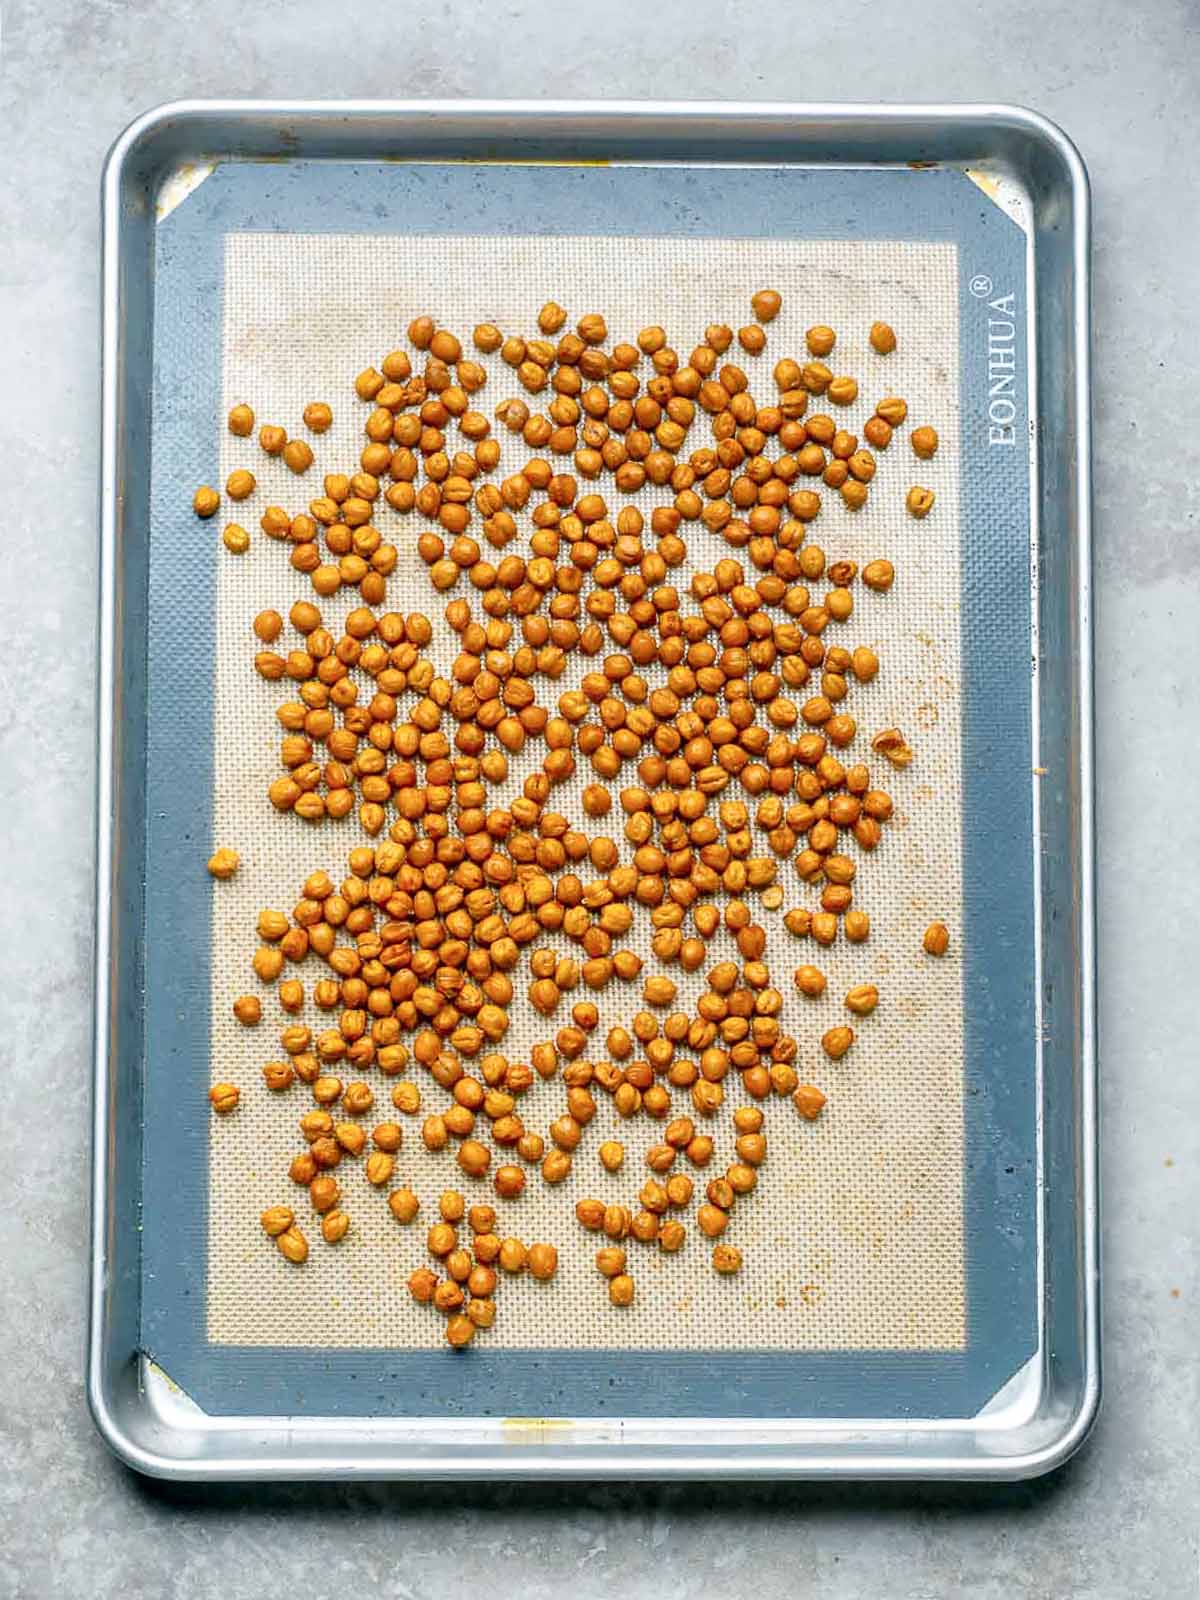 Roasted chickpeas on a baking tray.